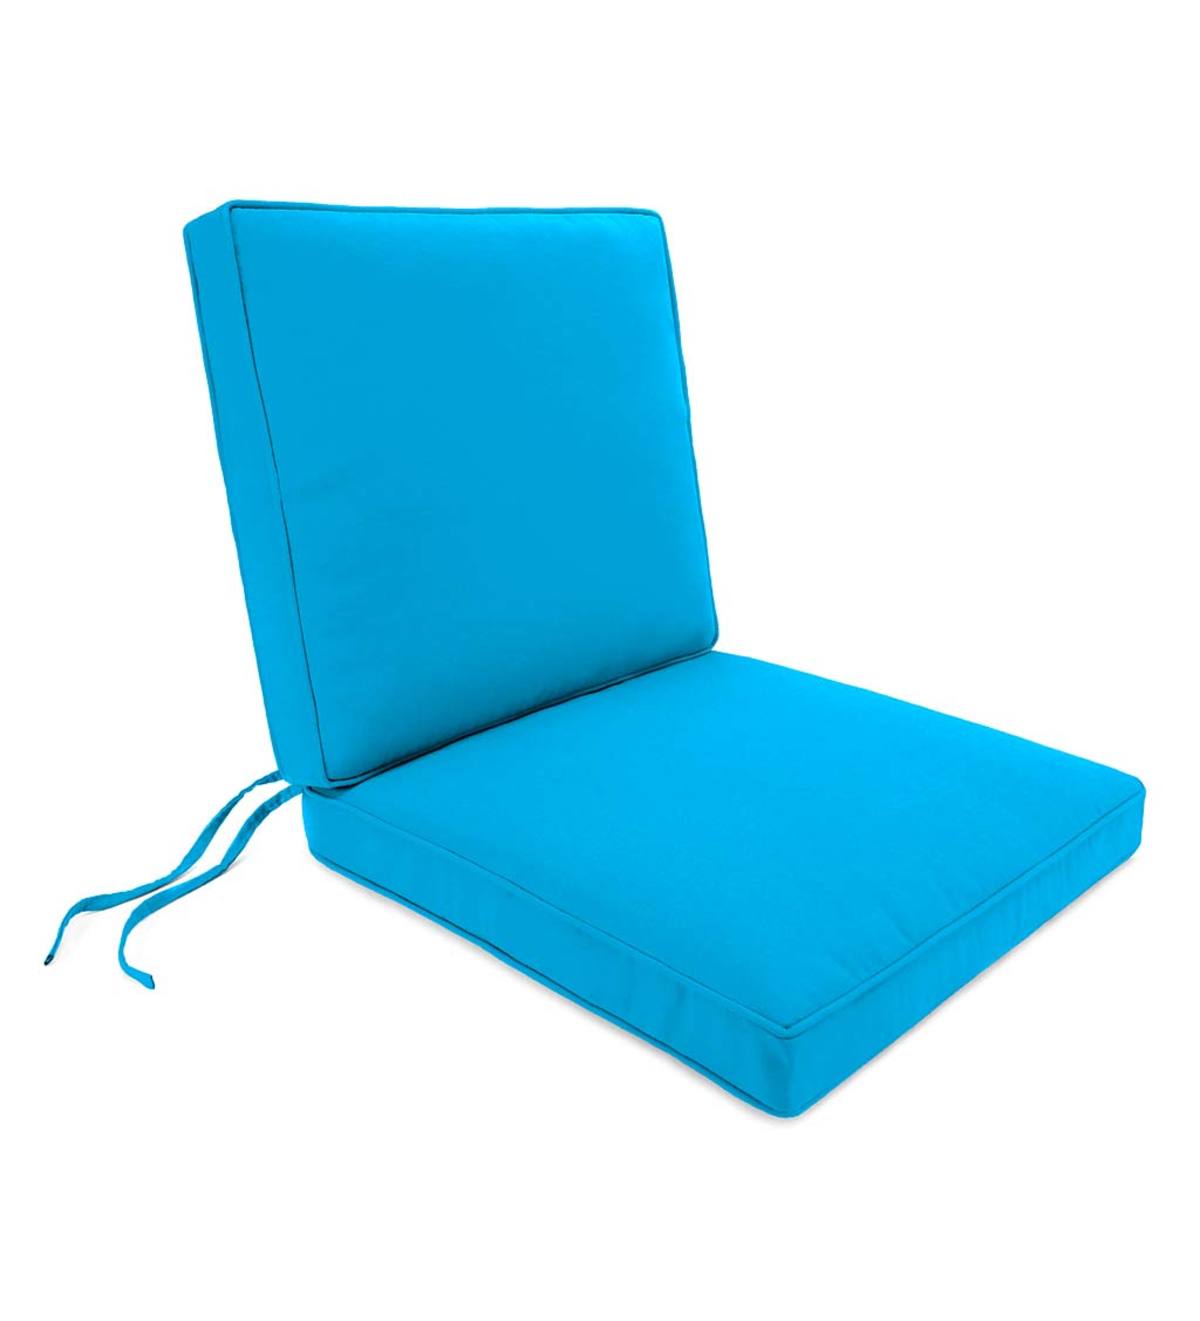 Deluxe Sunbrella Seat And Back Chair, Sunbrella Outdoor Dining Chair Cushions With Ties